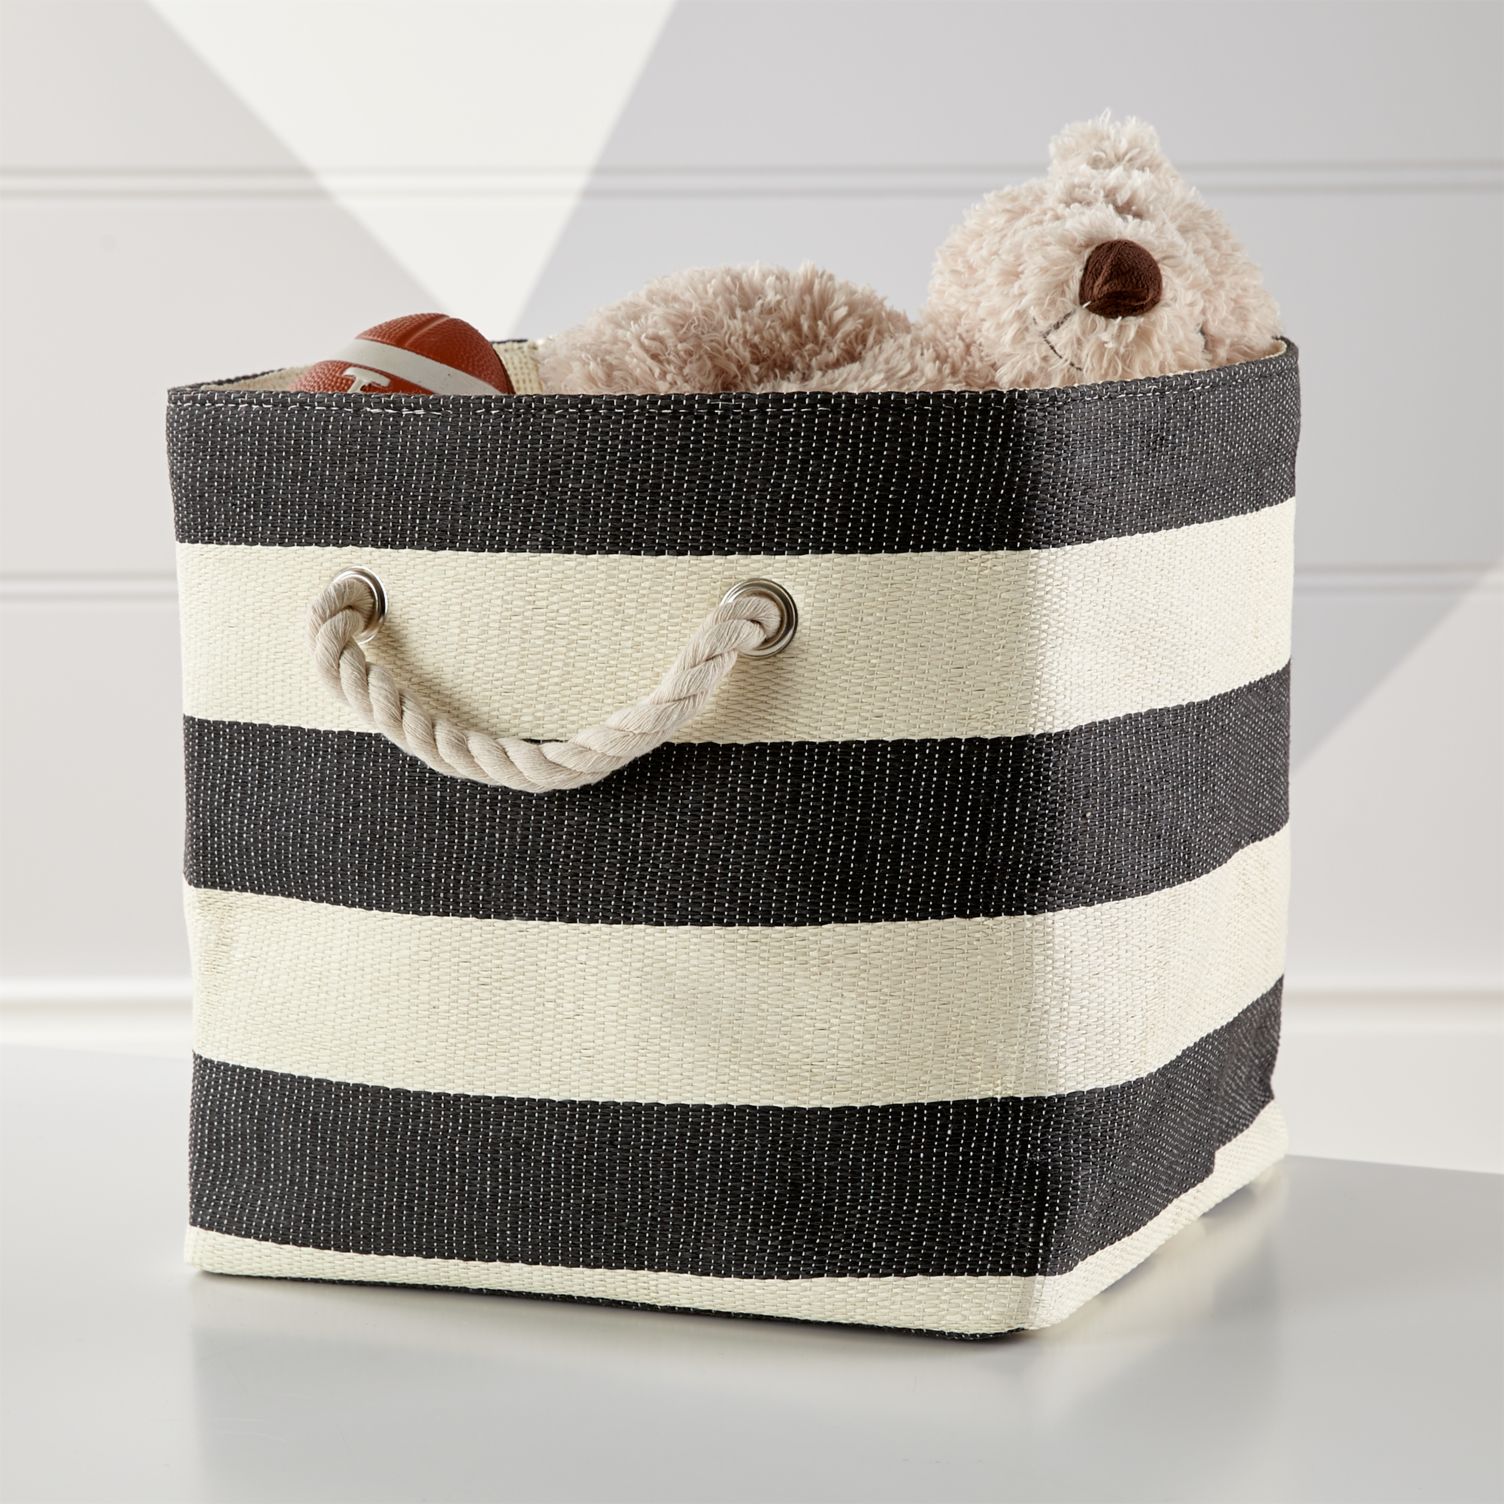 Black and white striped storage bin with rope handle